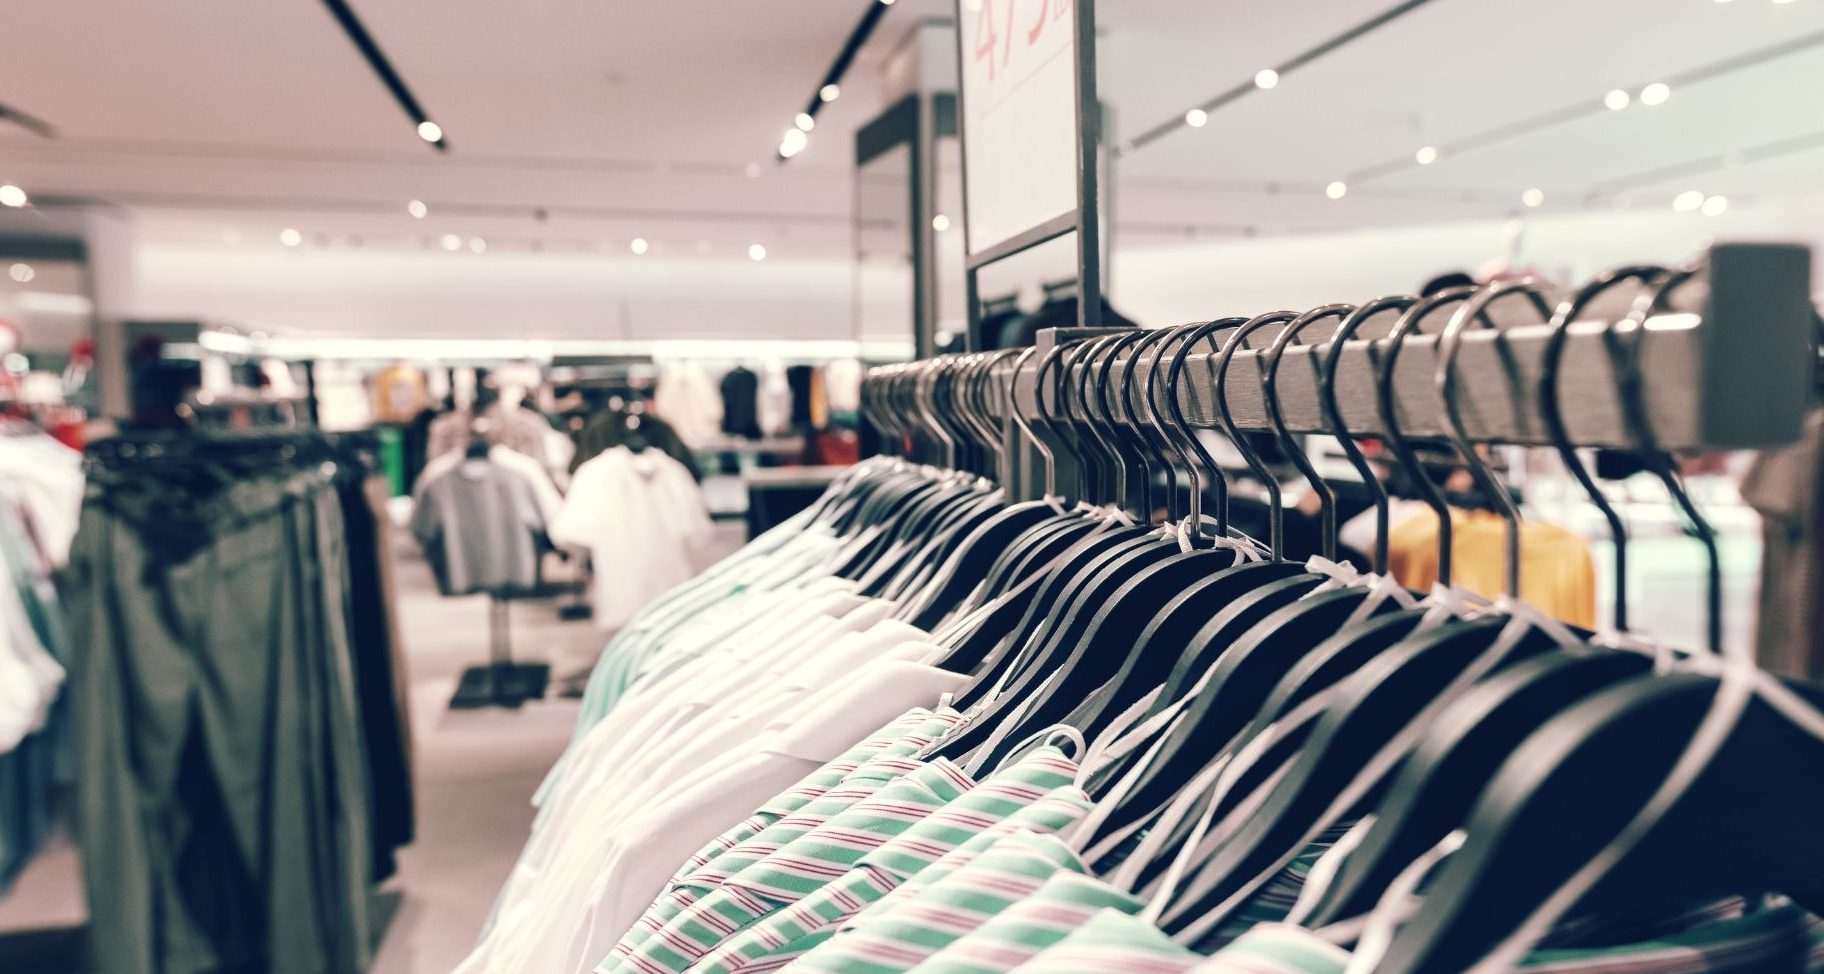 Global Fast Fashion Market Outlook, Opportunities And Strategies